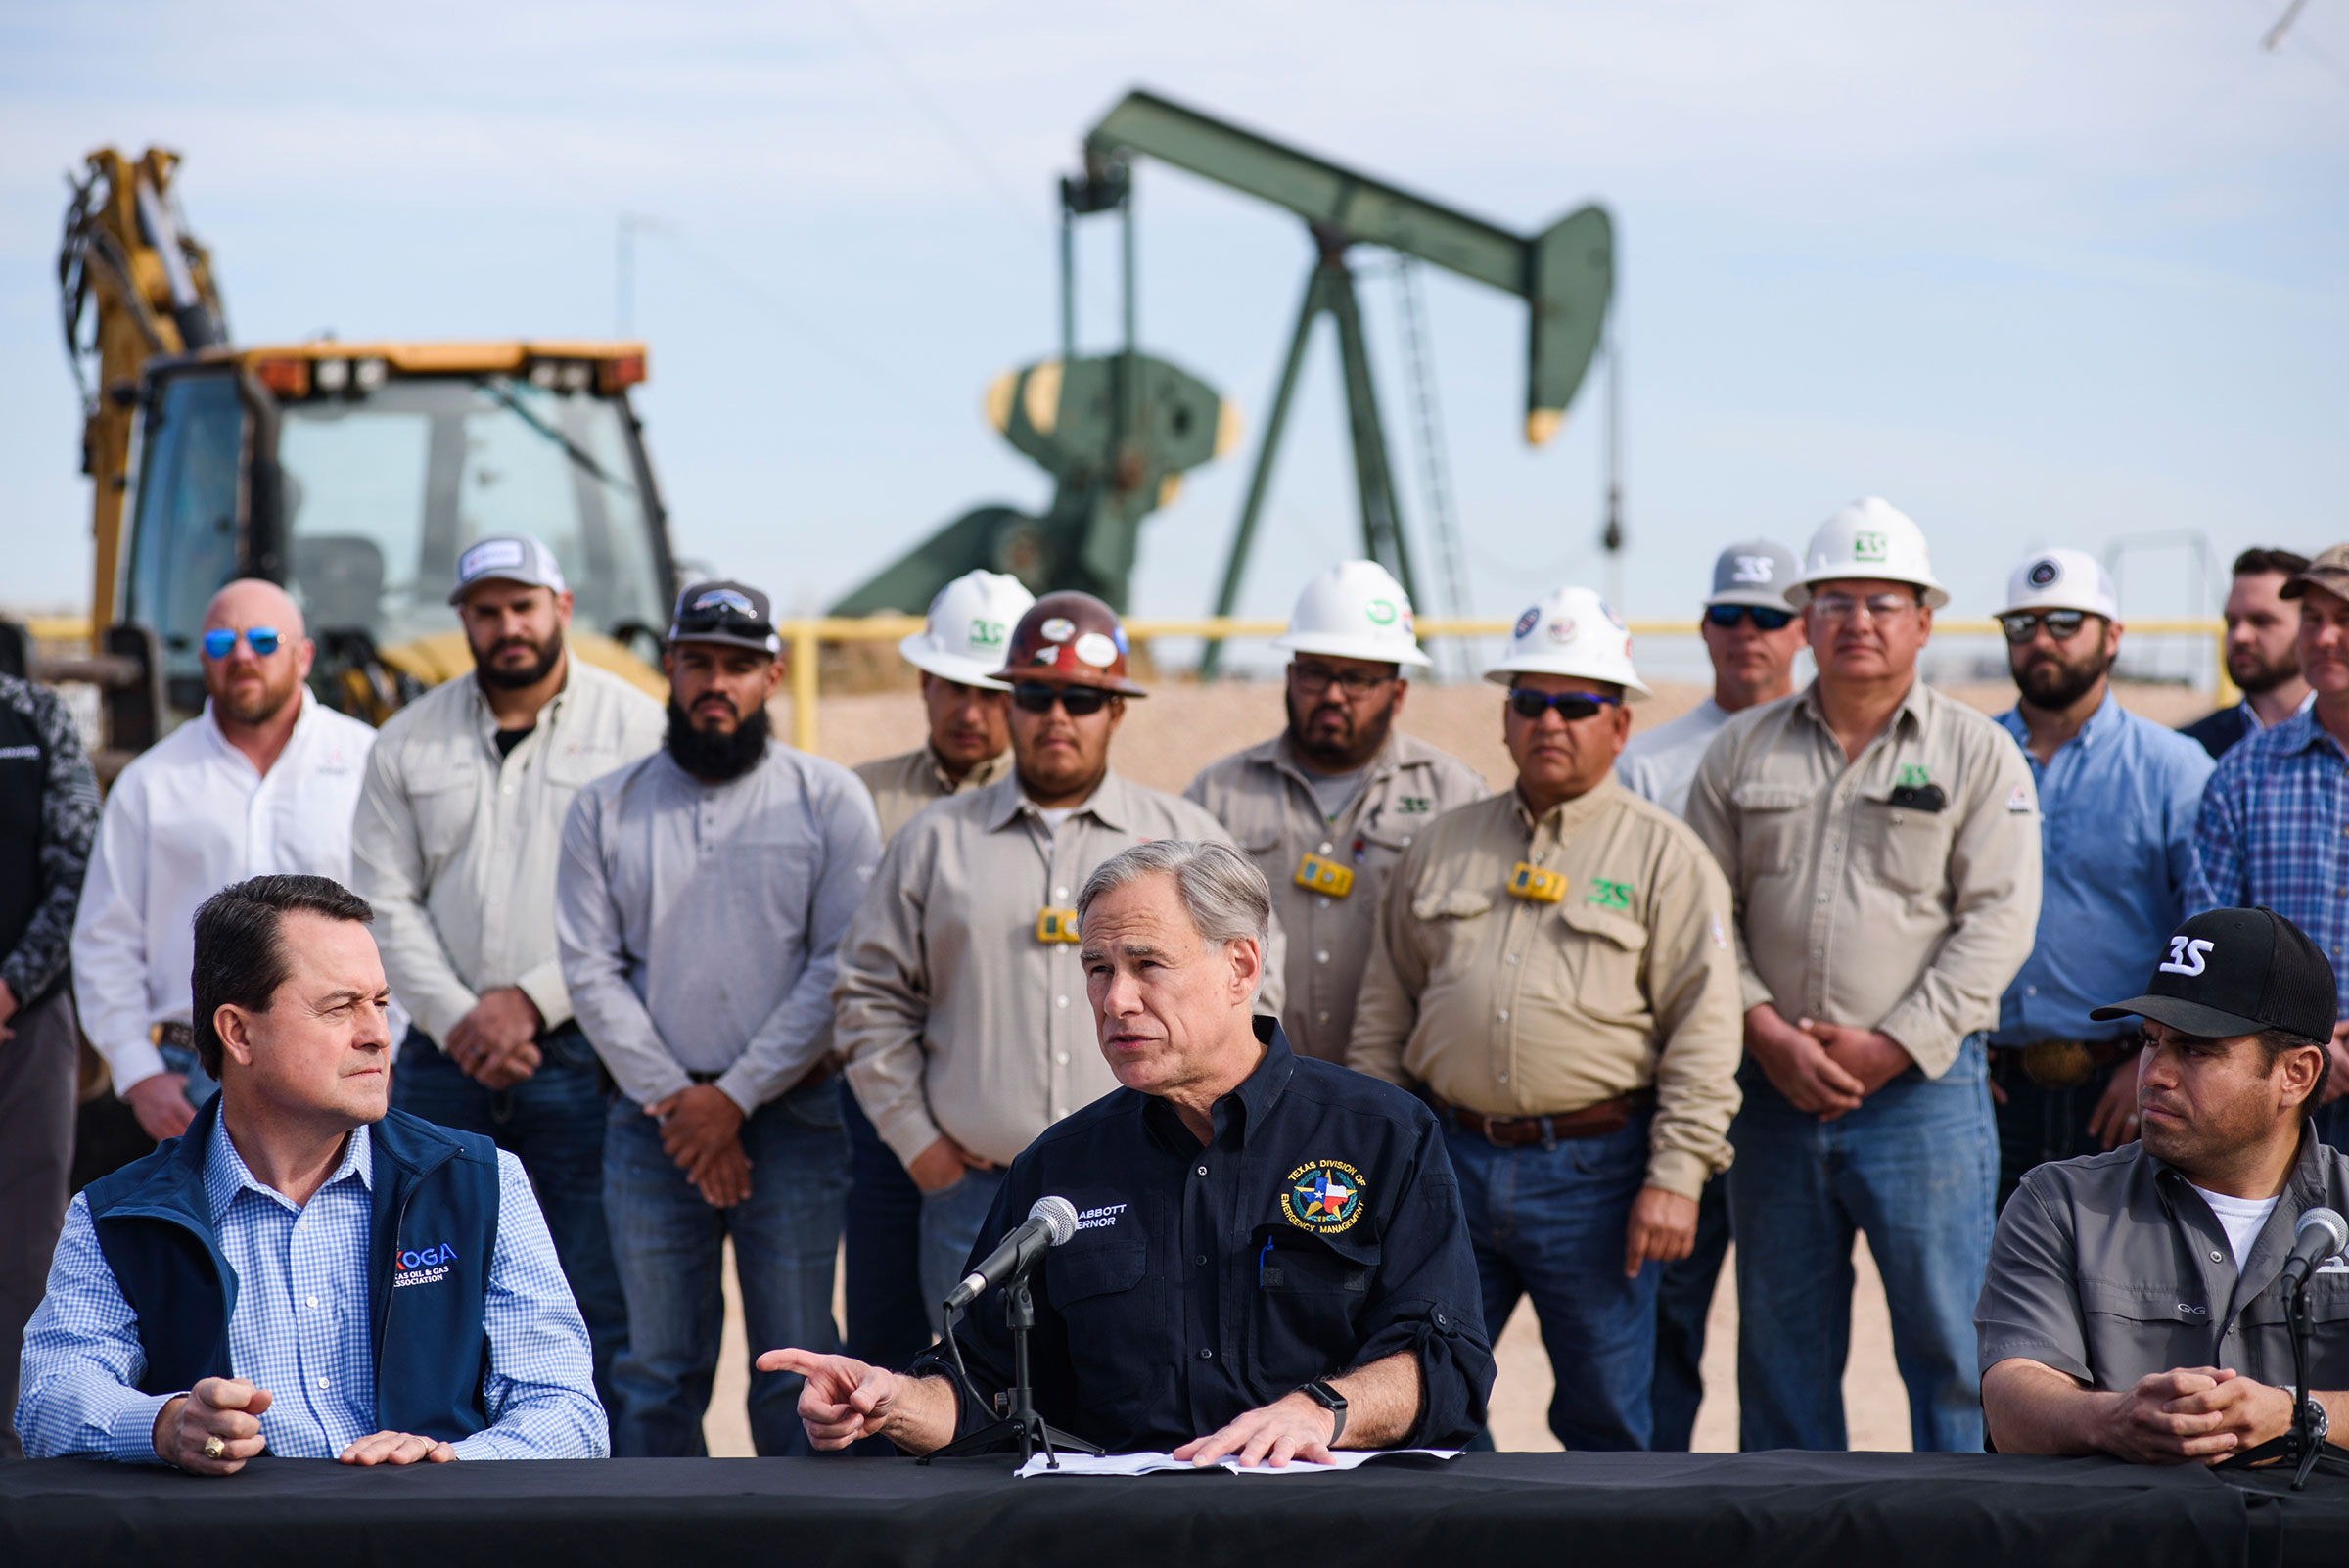 Texas Governor Greg Abbott speaks during a press conference in the Permian Basin on Feb. 1, 2022 in Midland, Texas. (Eli Hartman—Odessa American/AP)